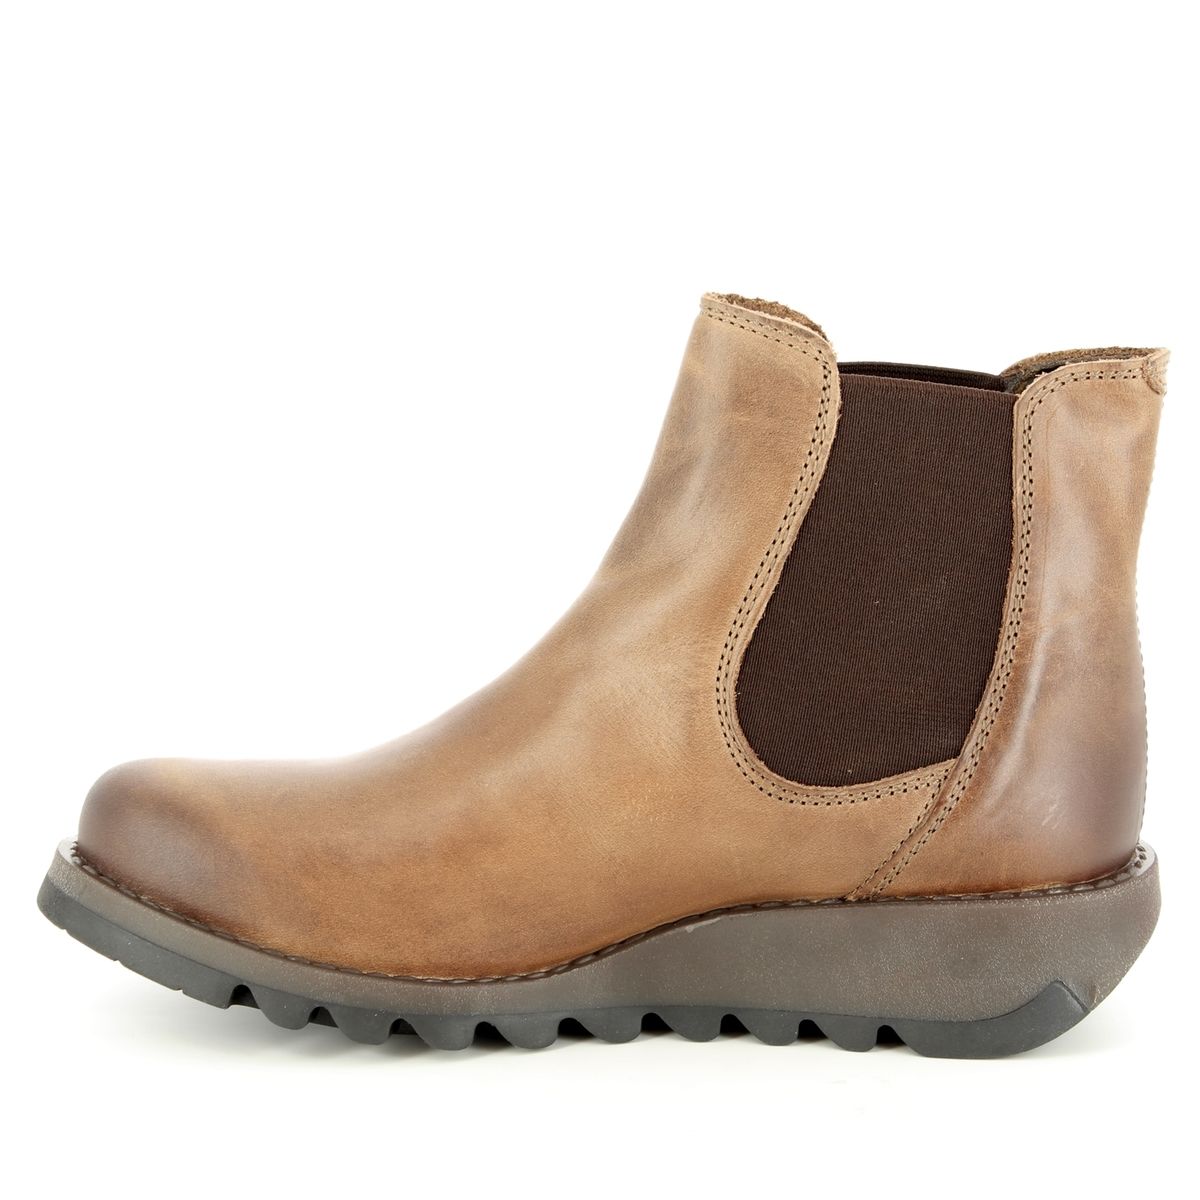 Fly London Salv Camel Womens Chelsea Boots P143195-002